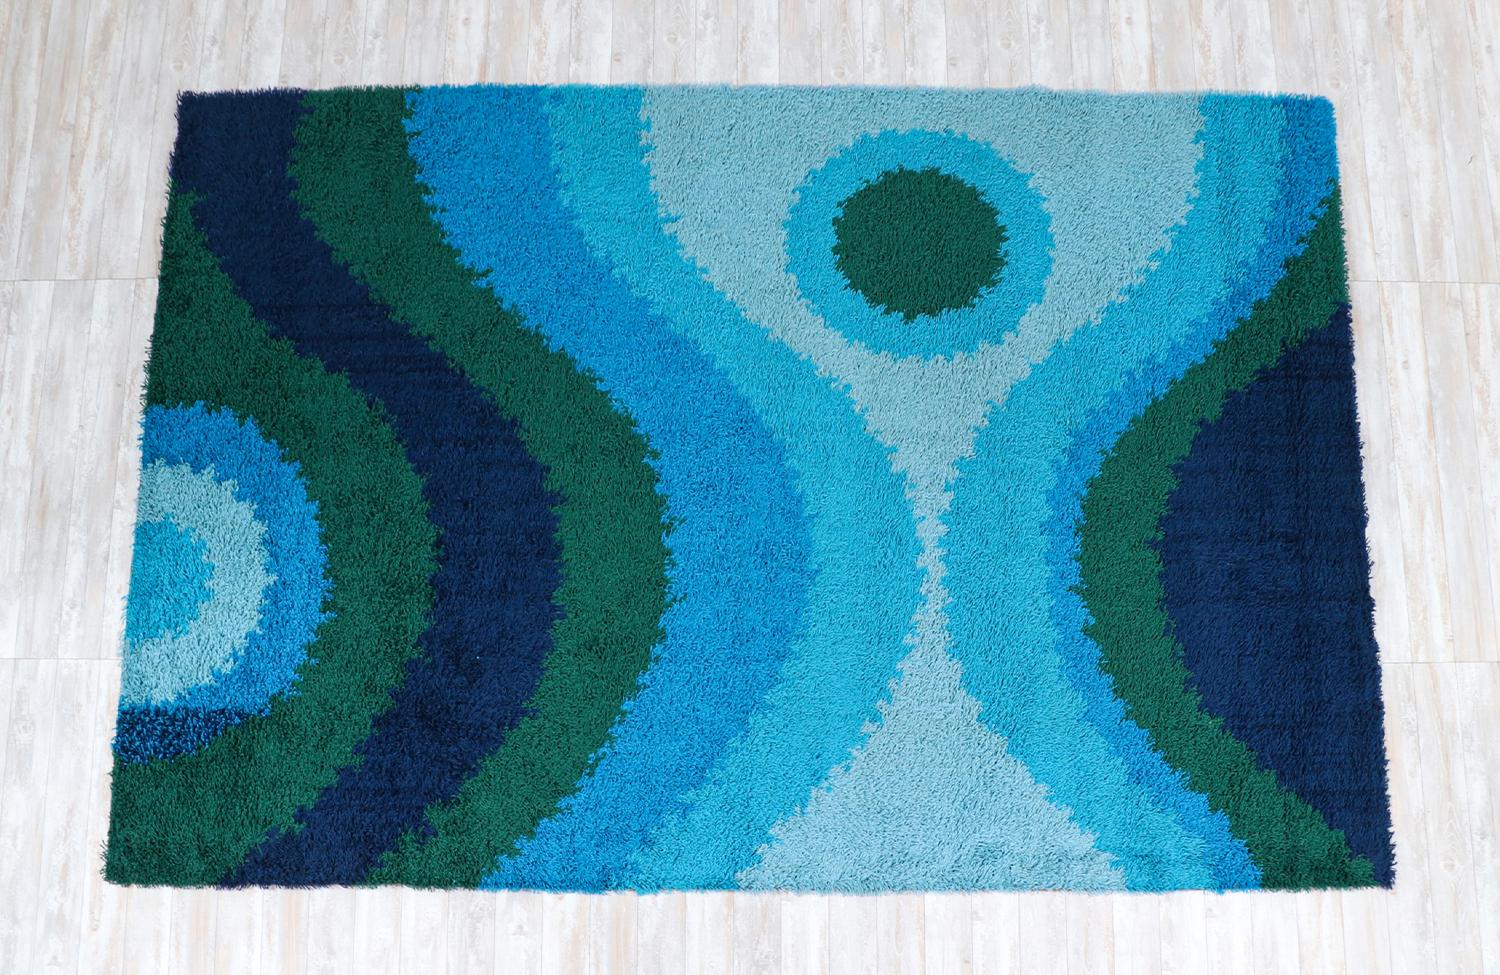 Large Danish modern hand-knotted blue/green wool rug by Rya.